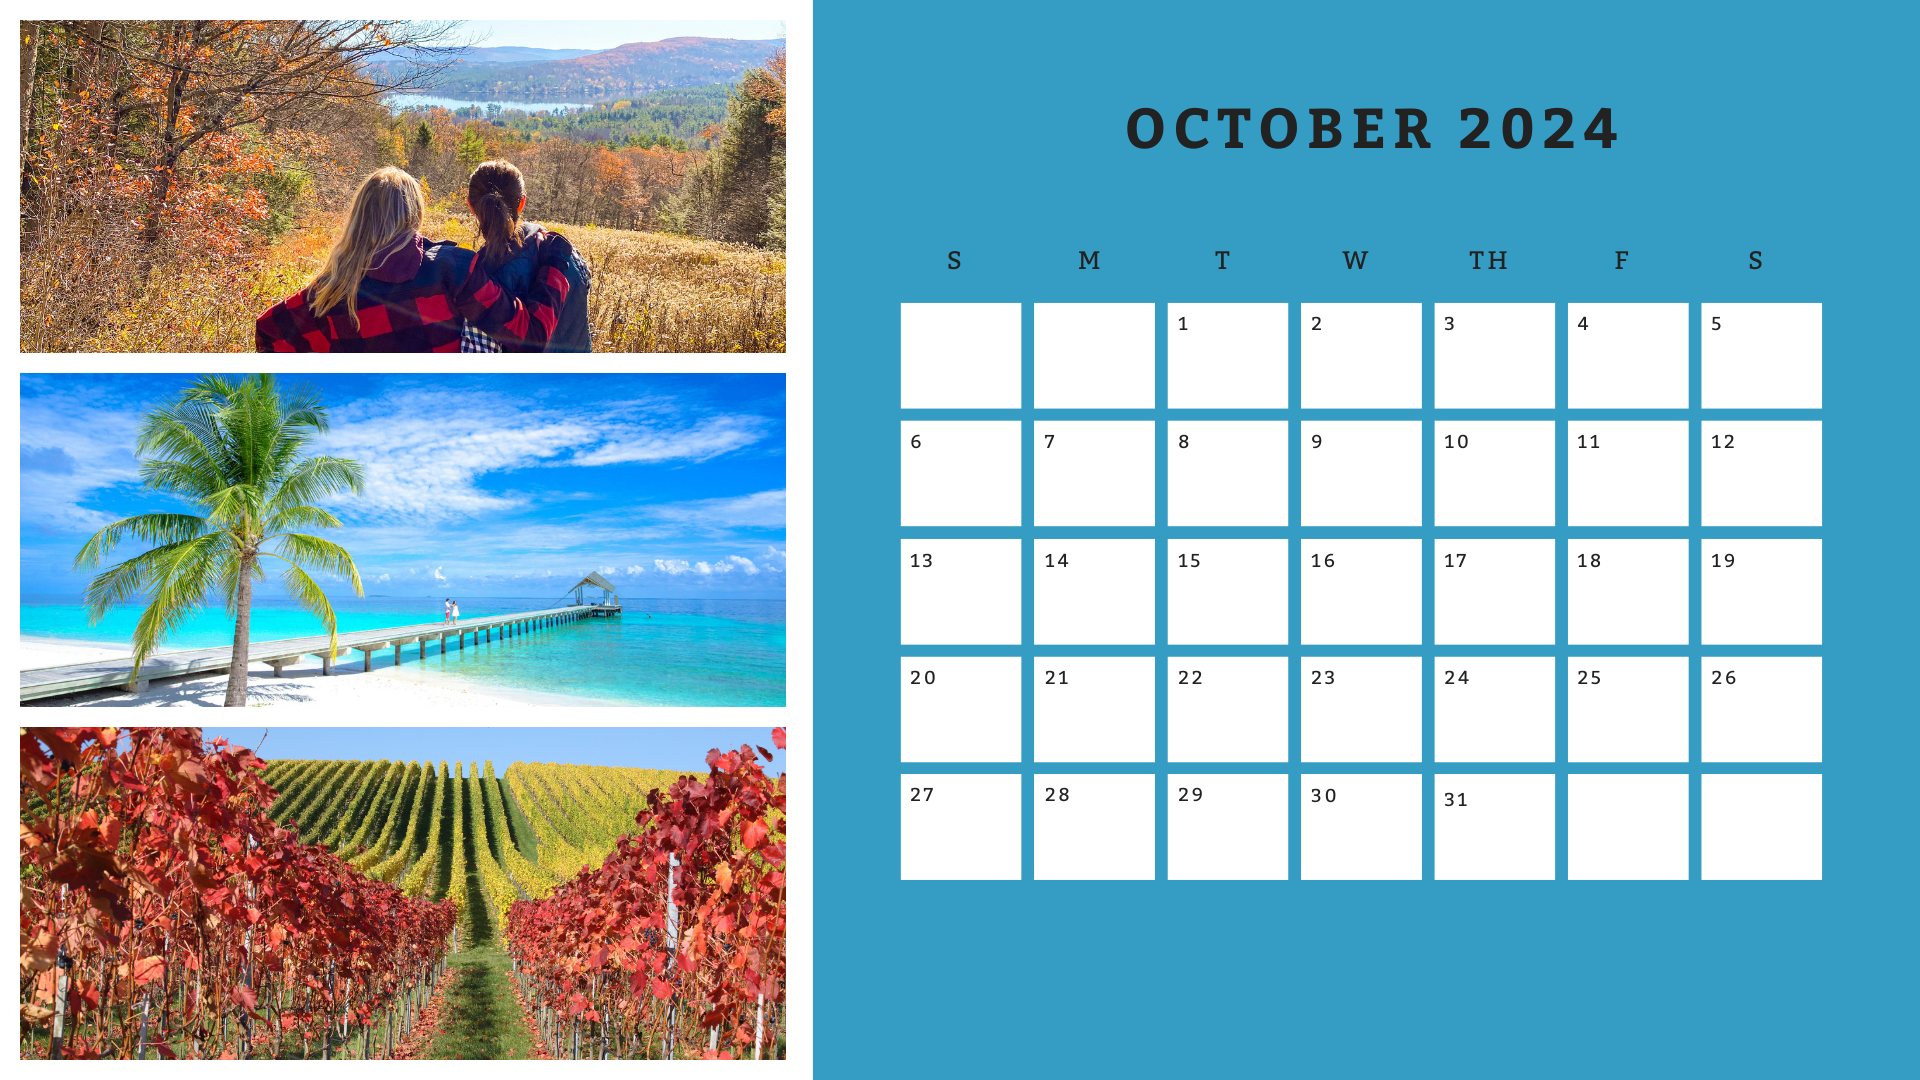 Where To Go In October